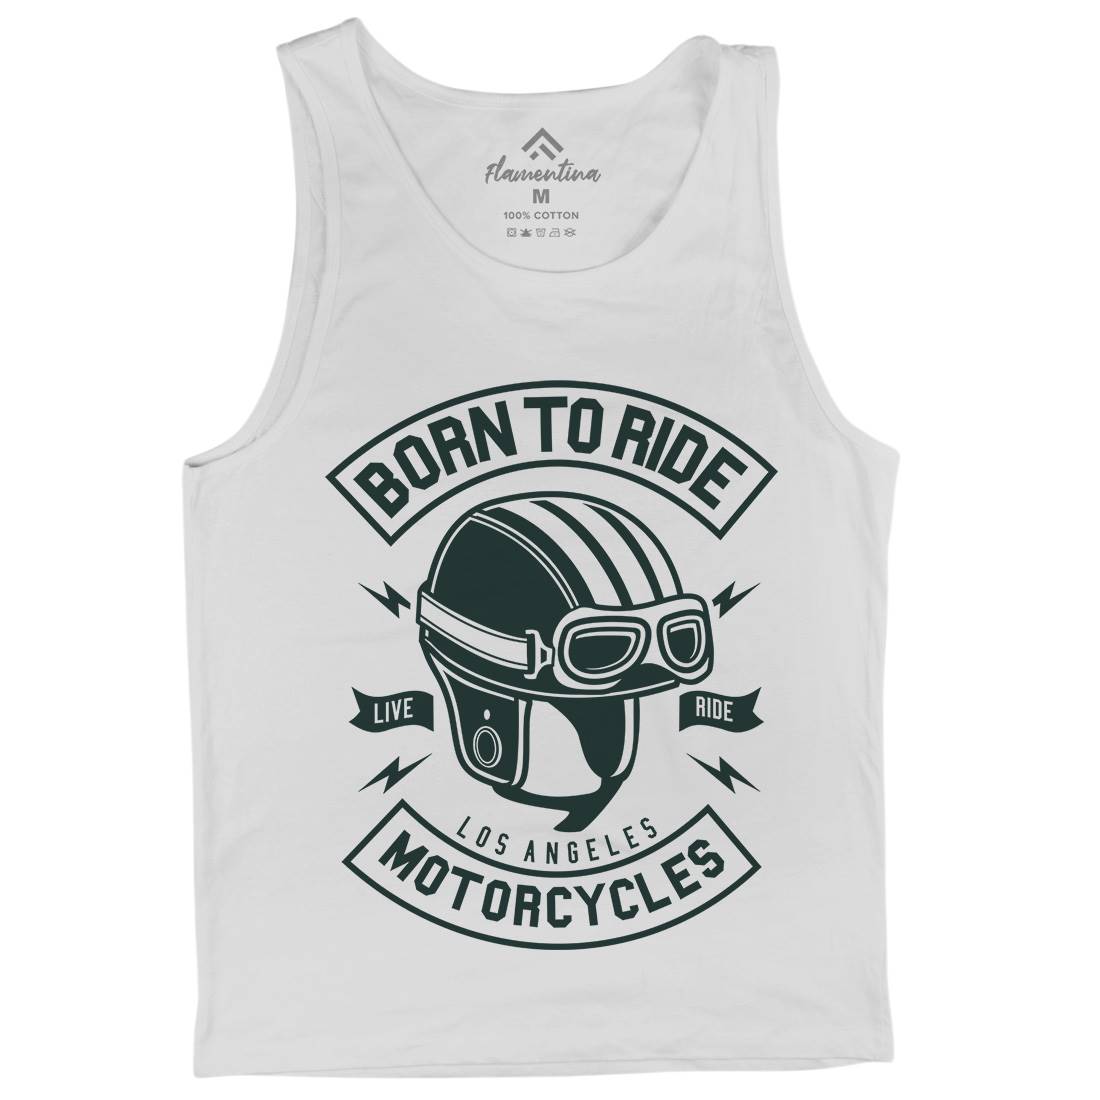 Born To Ride Mens Tank Top Vest Motorcycles A212